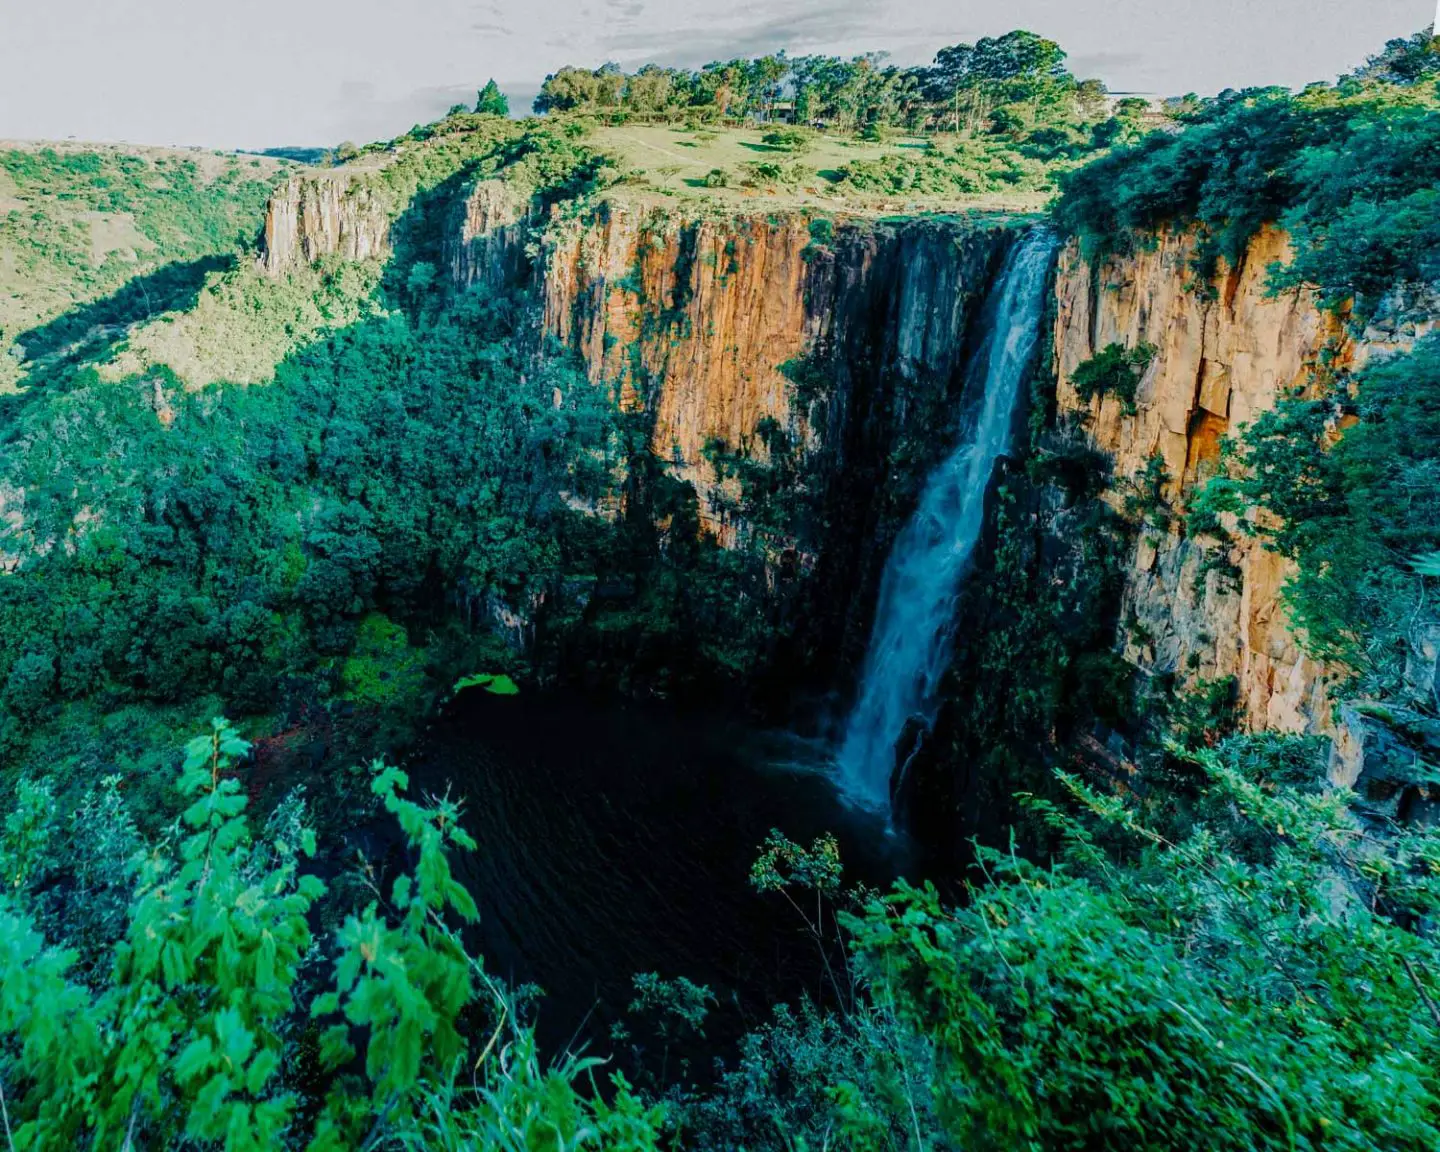 howick falls in south africa